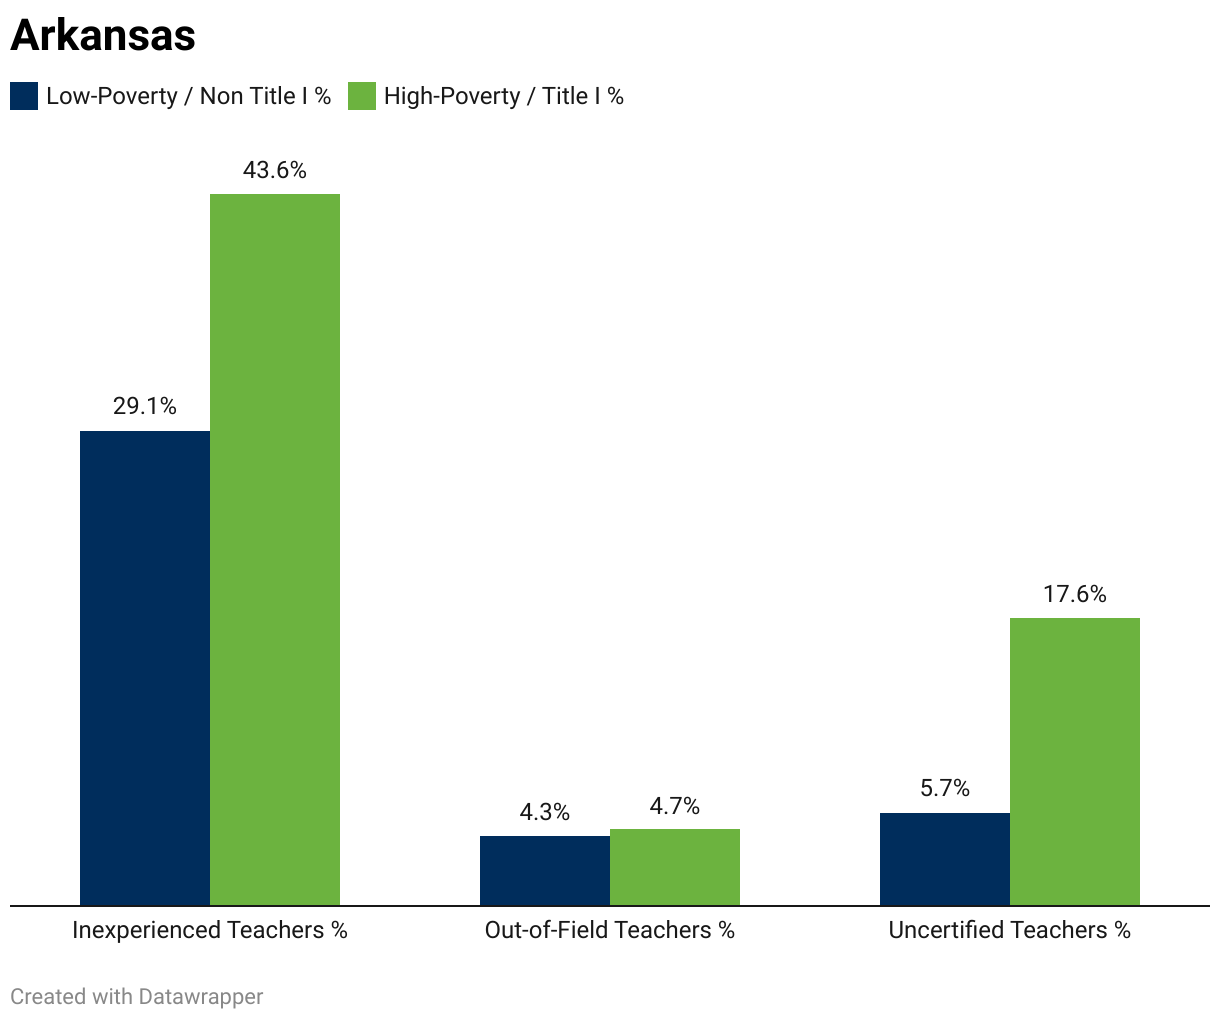 A grouped column chart showing the percentage of inexperienced, out-of-field and uncertified teachers in low-poverty non-Title I schools vs. higher-poverty Title I schools IN ARKANSAS.